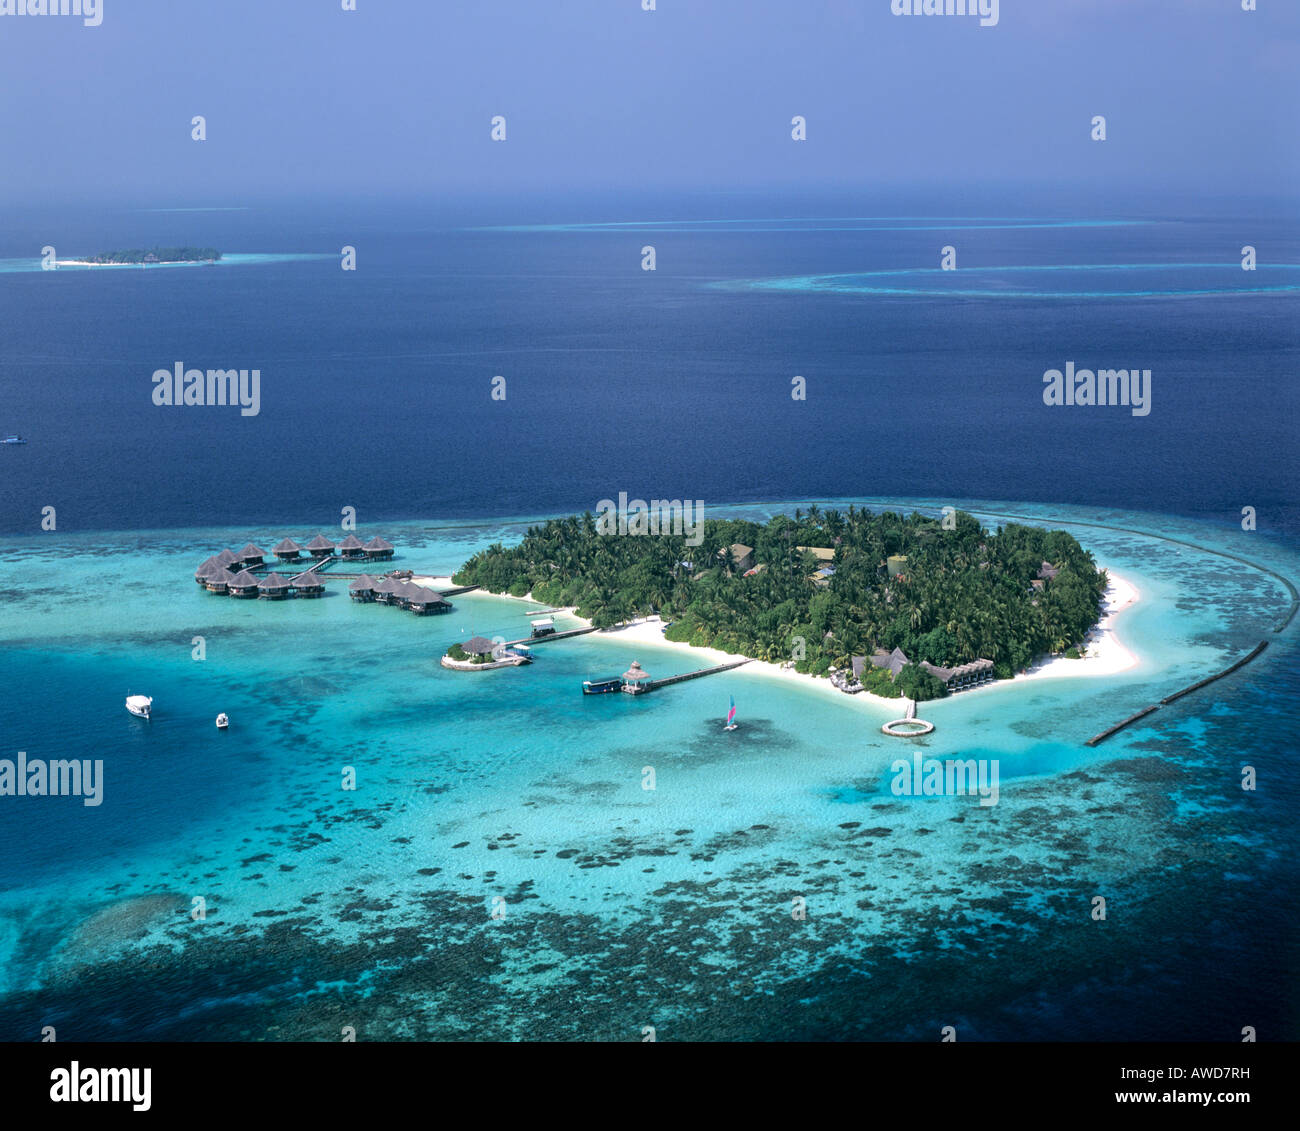 Aerial view of Baros, North Male Atoll, Maldives, Indian Ocean Stock Photo